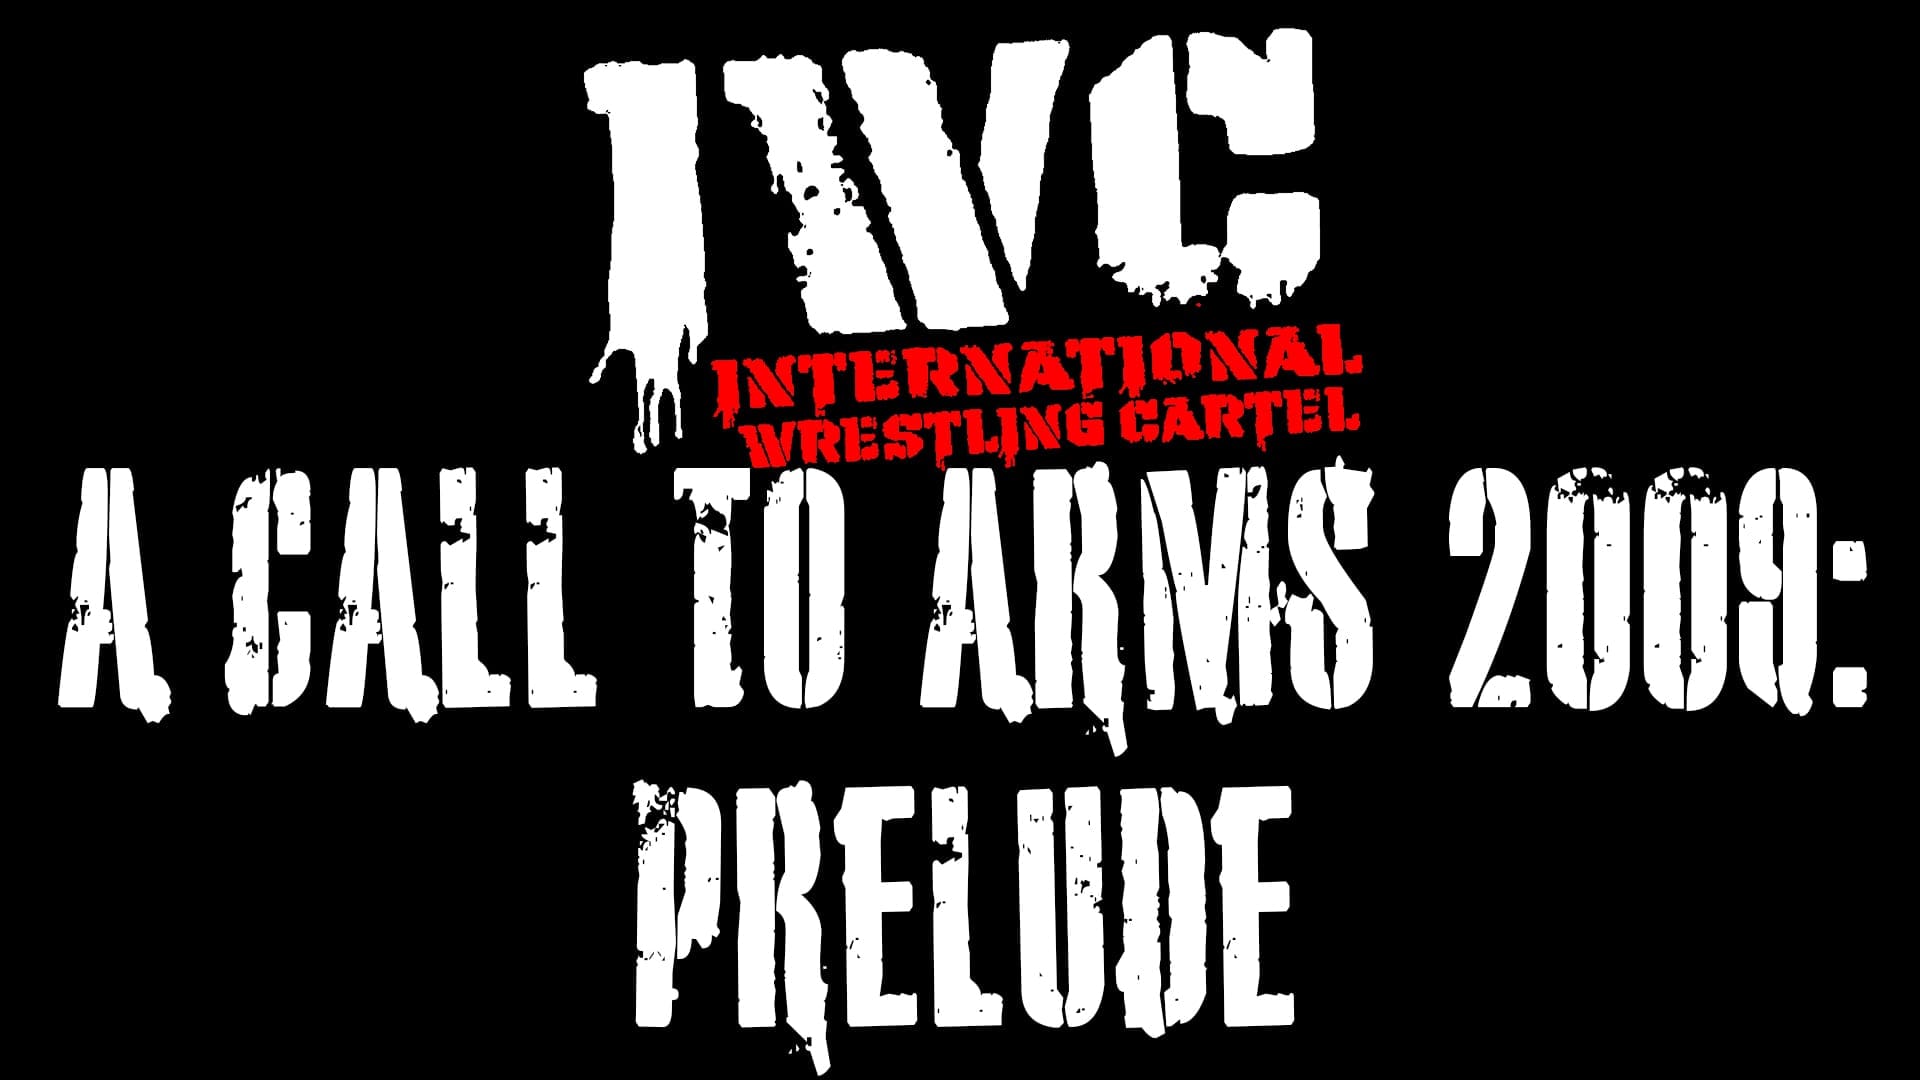 A Call to Arms 2009: Prelude